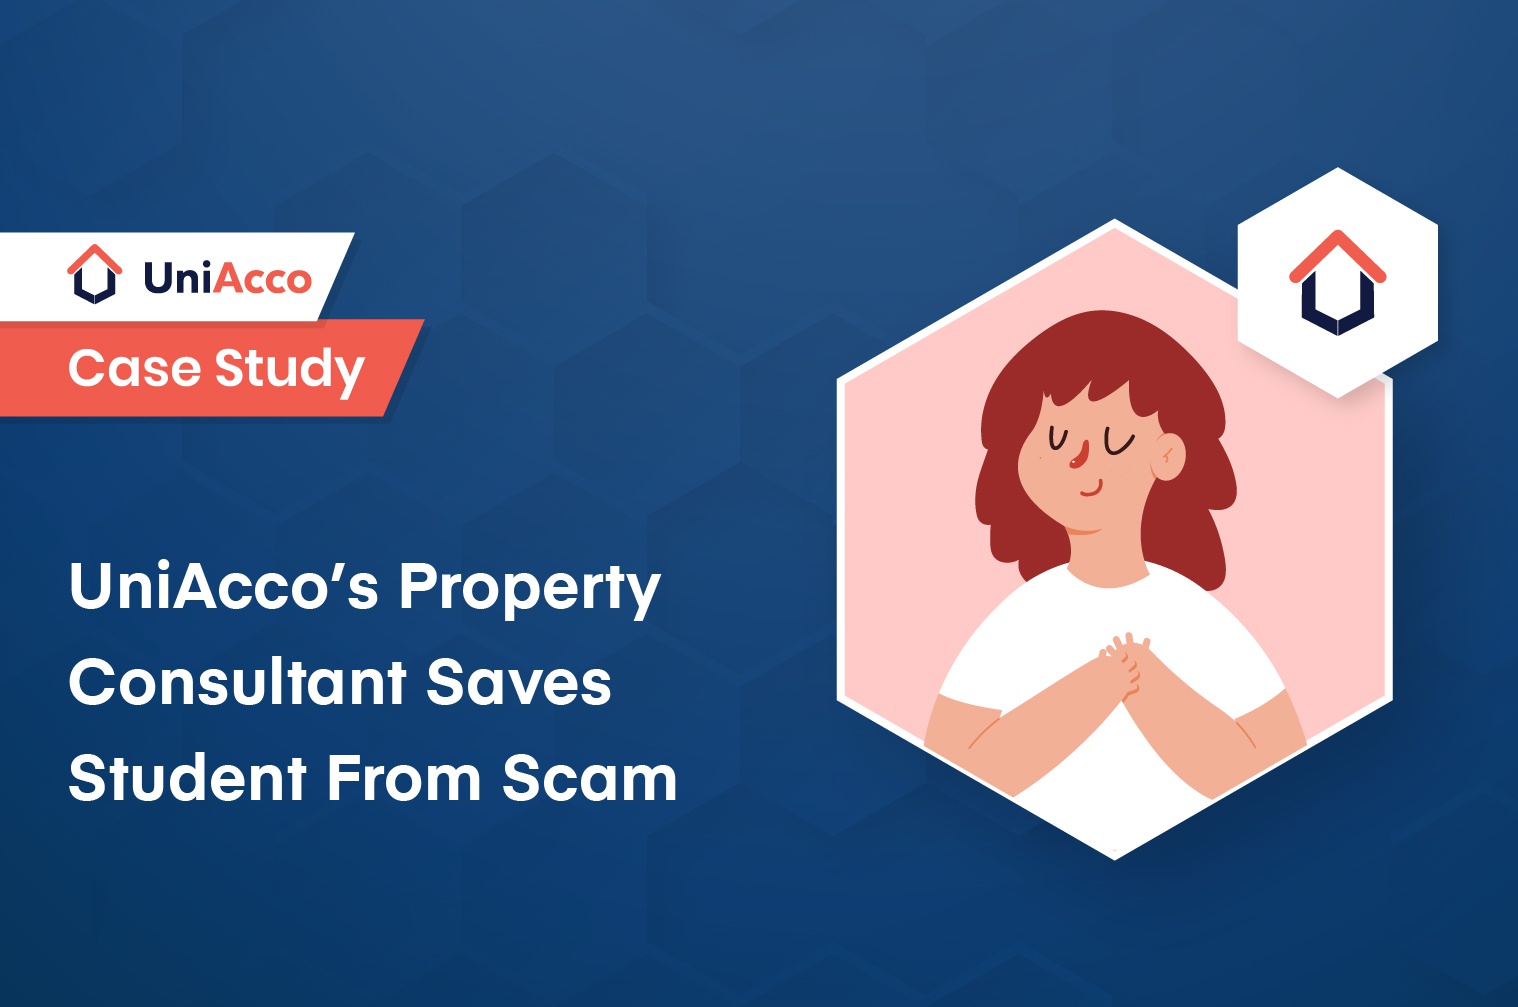 Case Study – UniAcco’s Property Consultant Saves Student From Scam